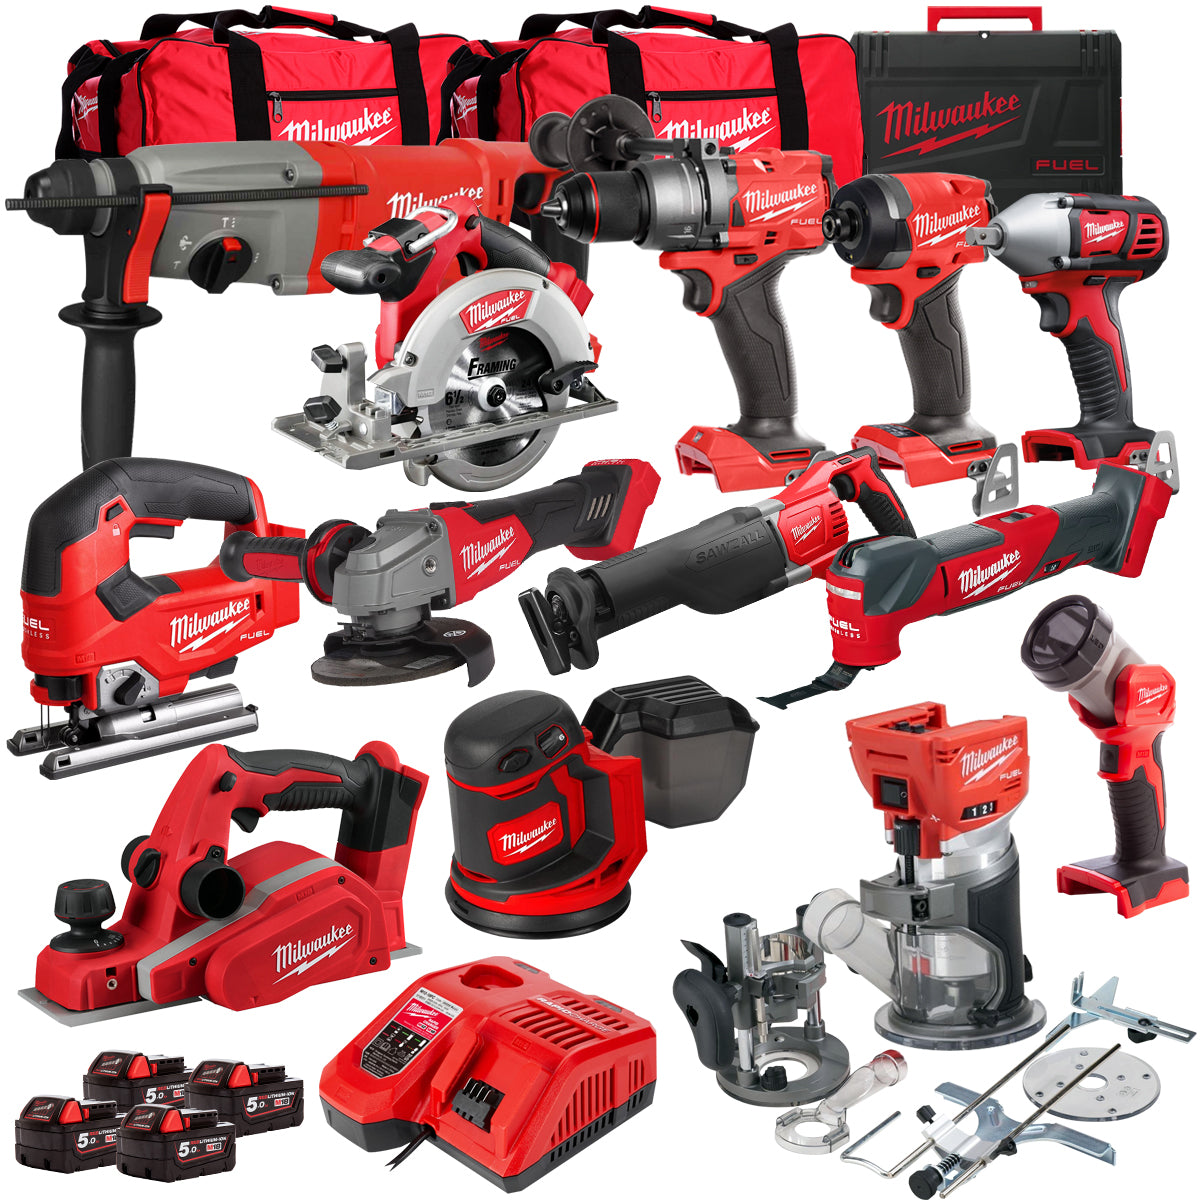 Milwaukee 18V Cordless 13 Piece Tool Kit with 4 x 5.0Ah Batteries & Charger in Bag T4TM-11